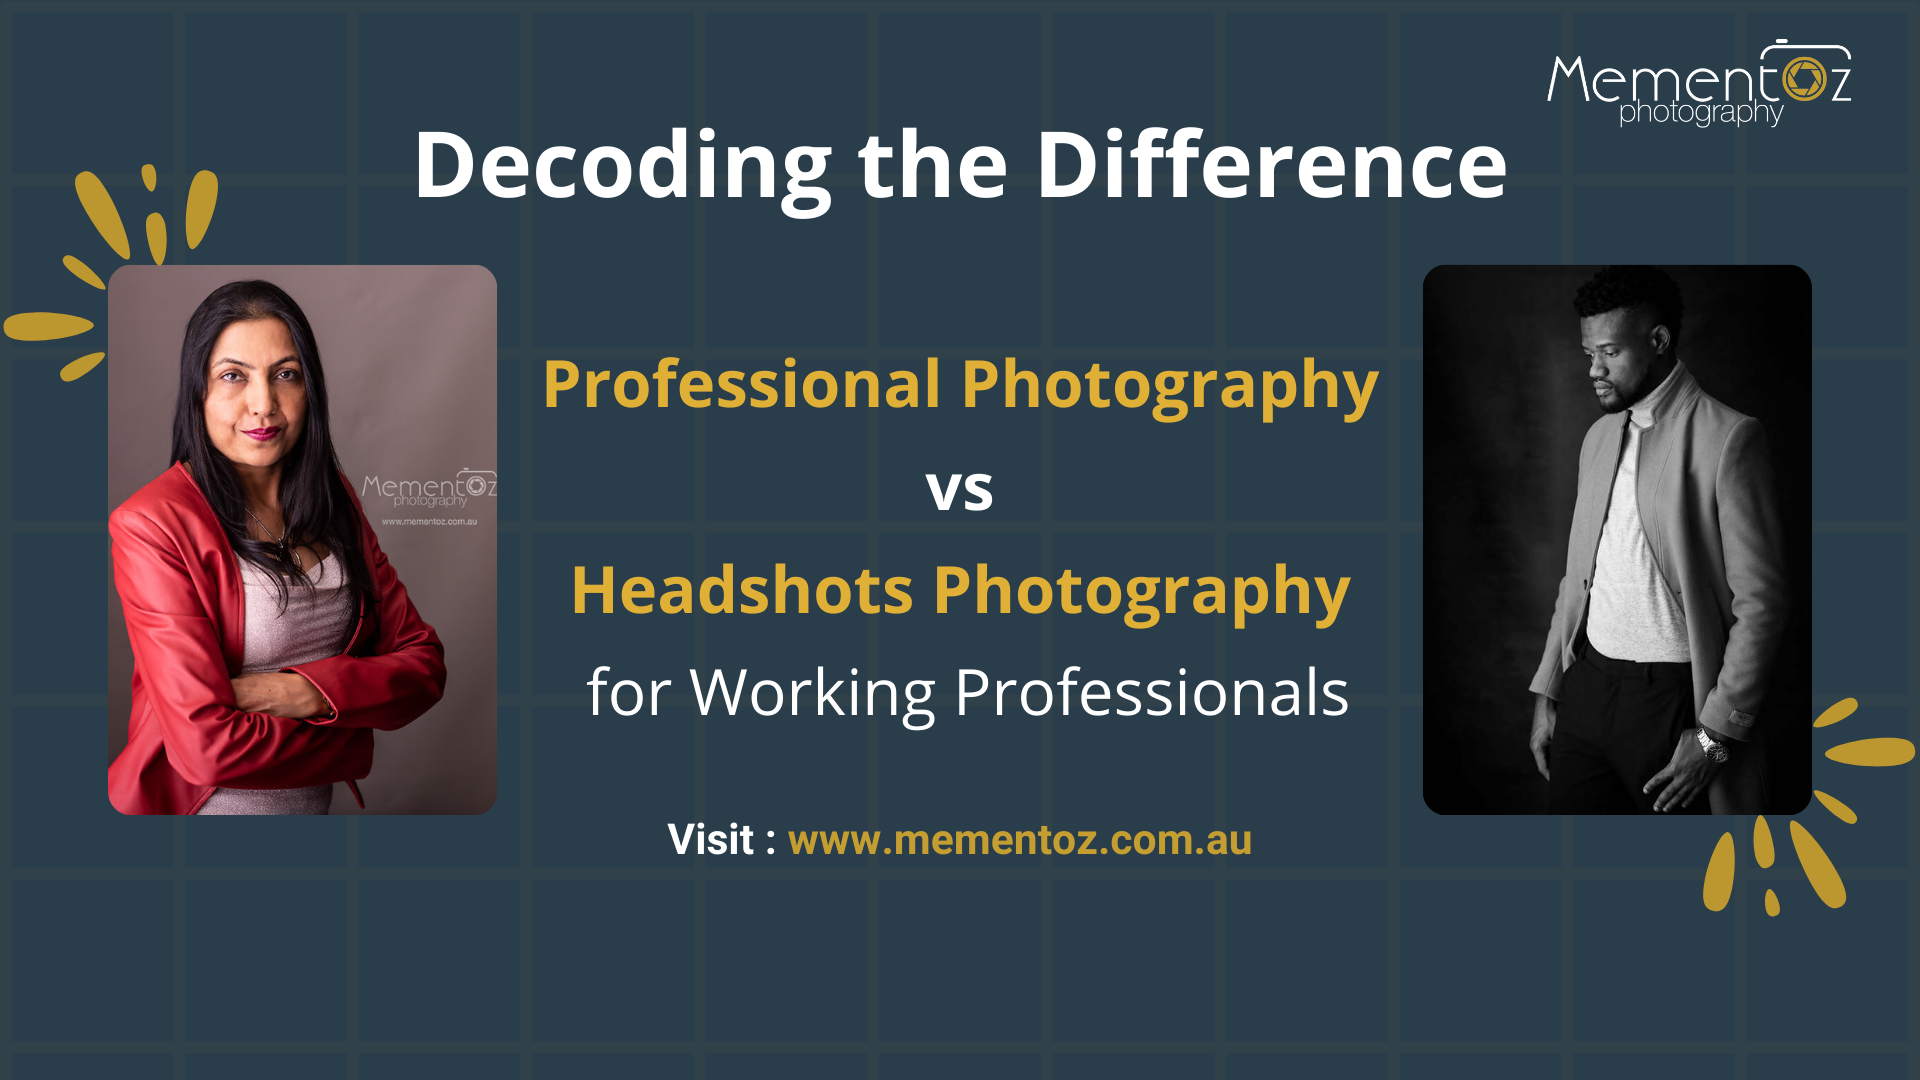 Decoding the Difference: Professional Photography vs Headshots Photography for Working Professionals